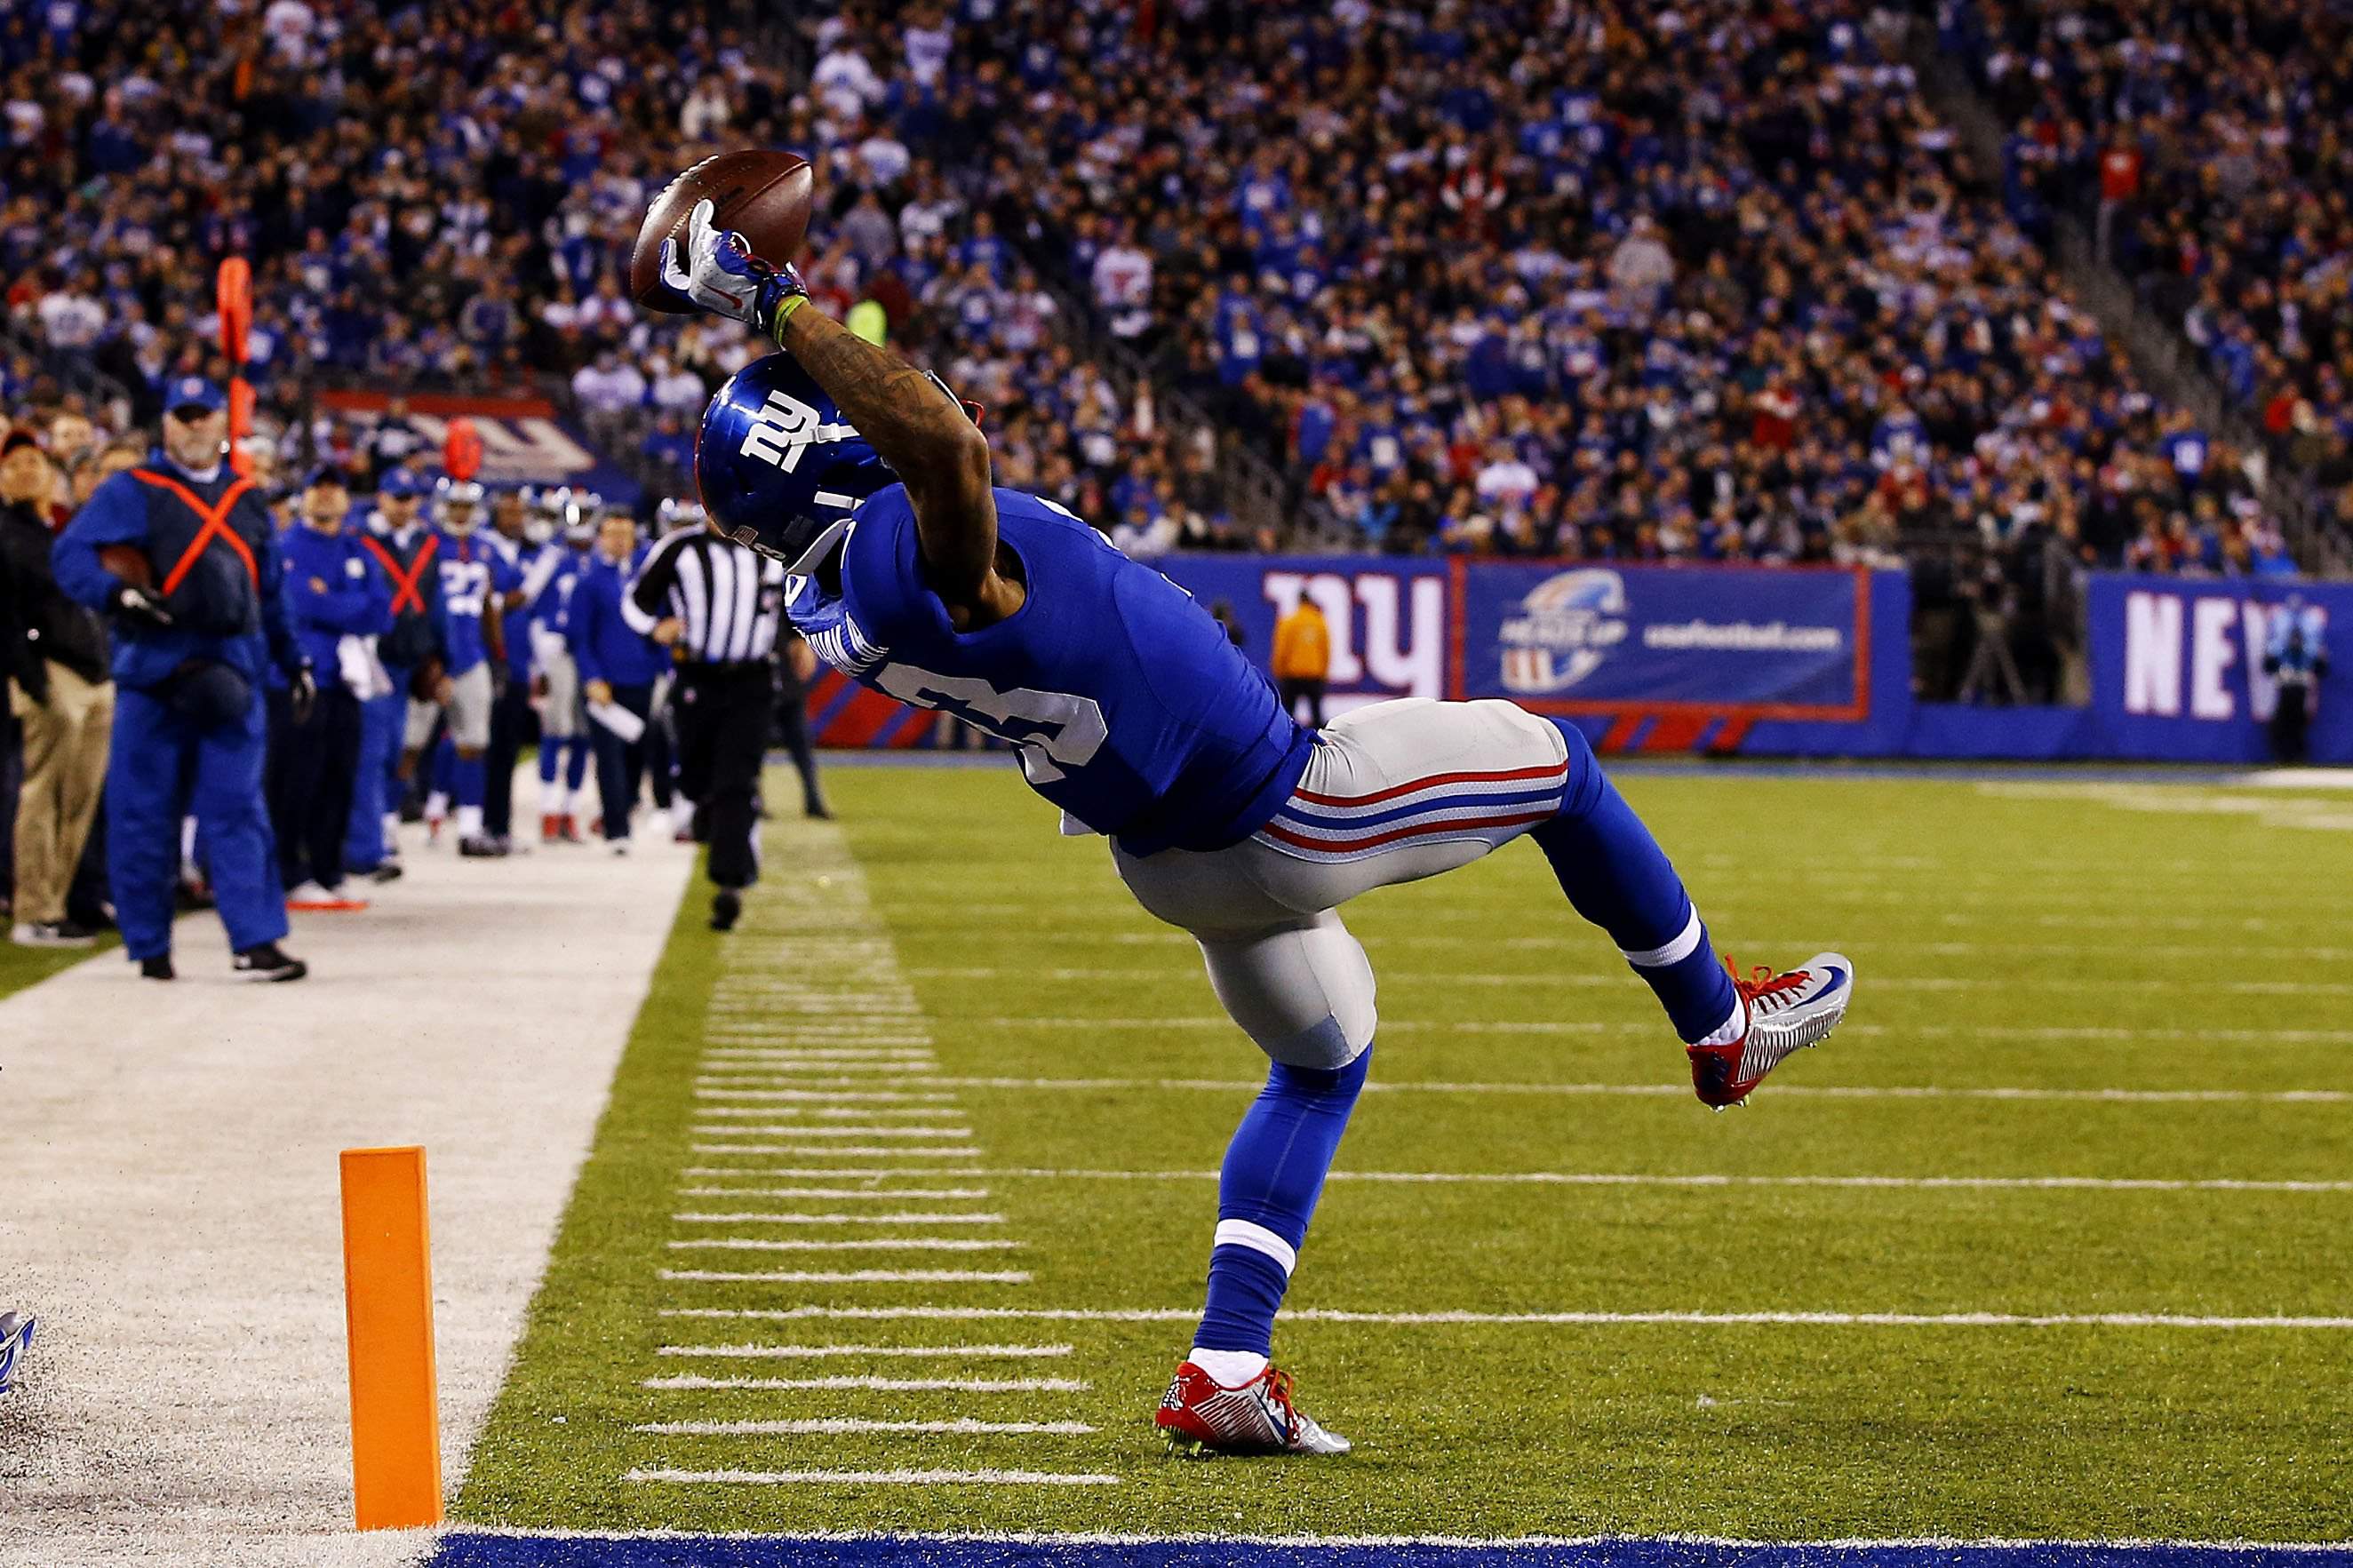 Giants Ruin Beautiful One-Handed Touchdown With Loss - Photo Gallery - Goth...